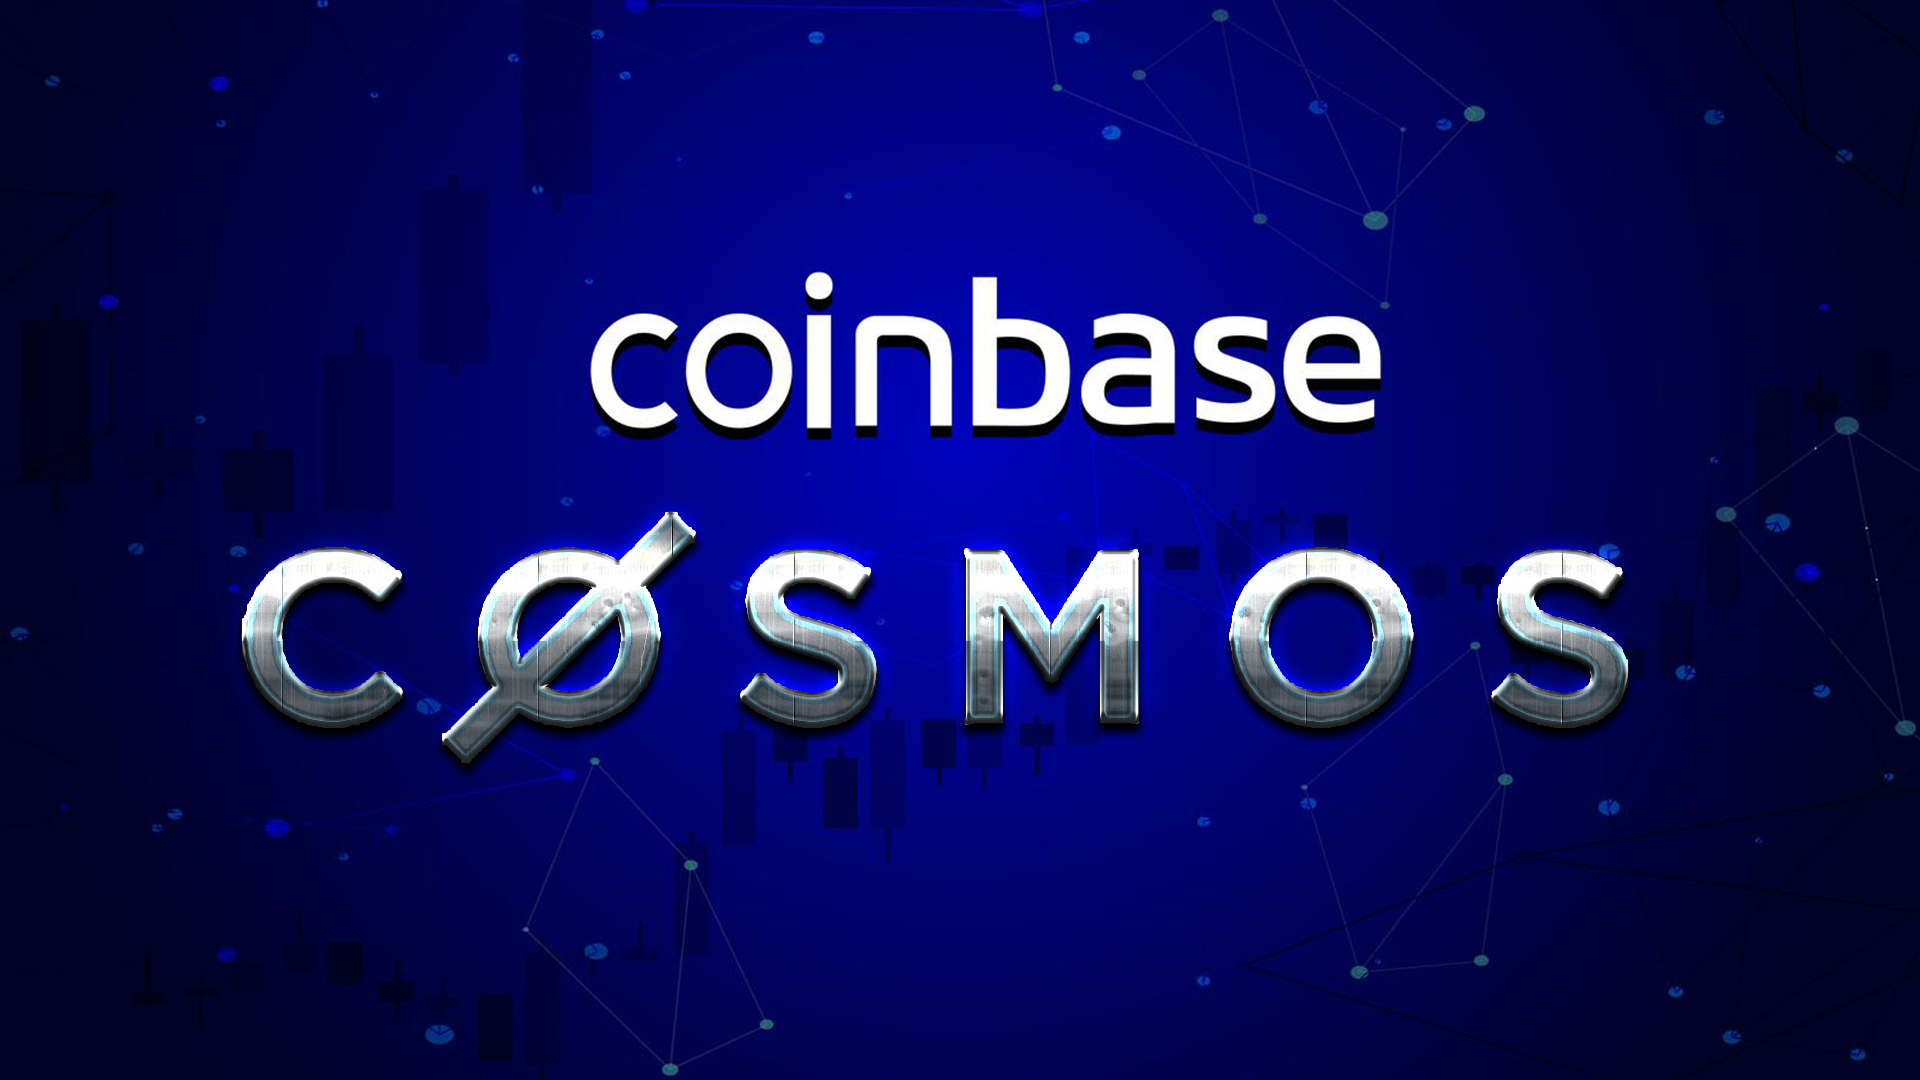 Cosmos-based project goes upwards amid news of coinbase listing